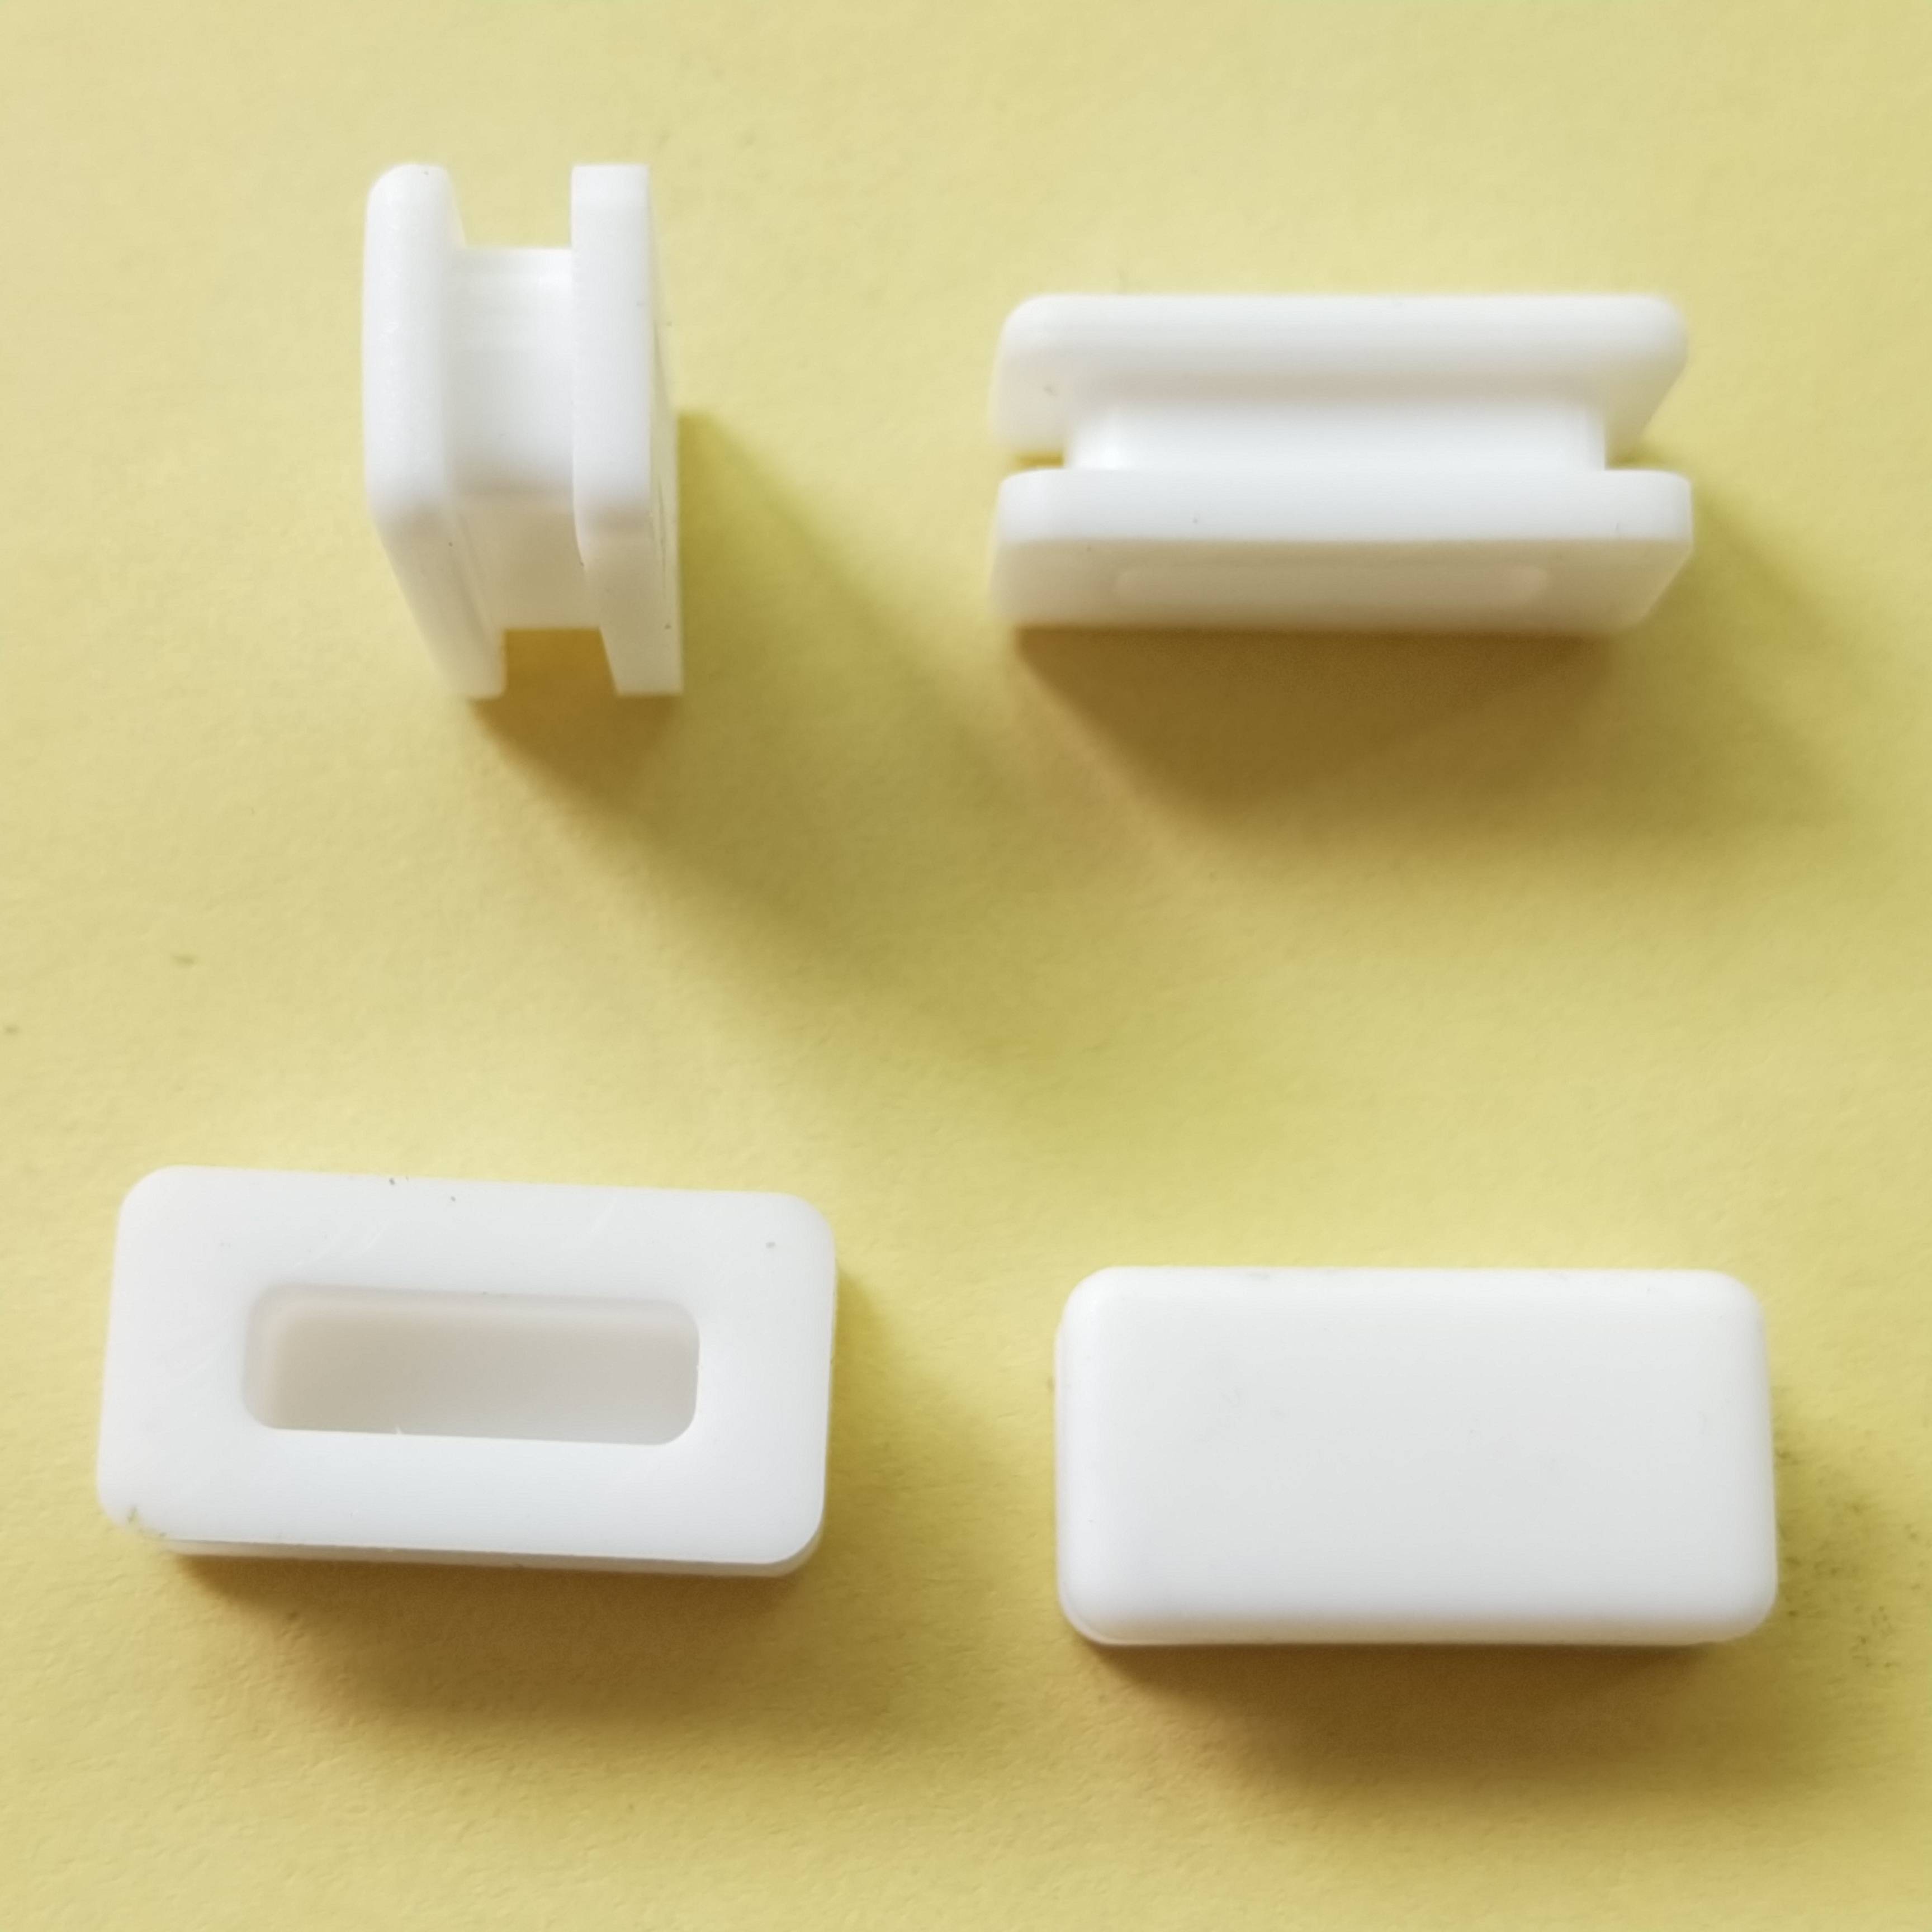 White Micro USB Silicone Plug with Grooves for Thermal imagers and accessories